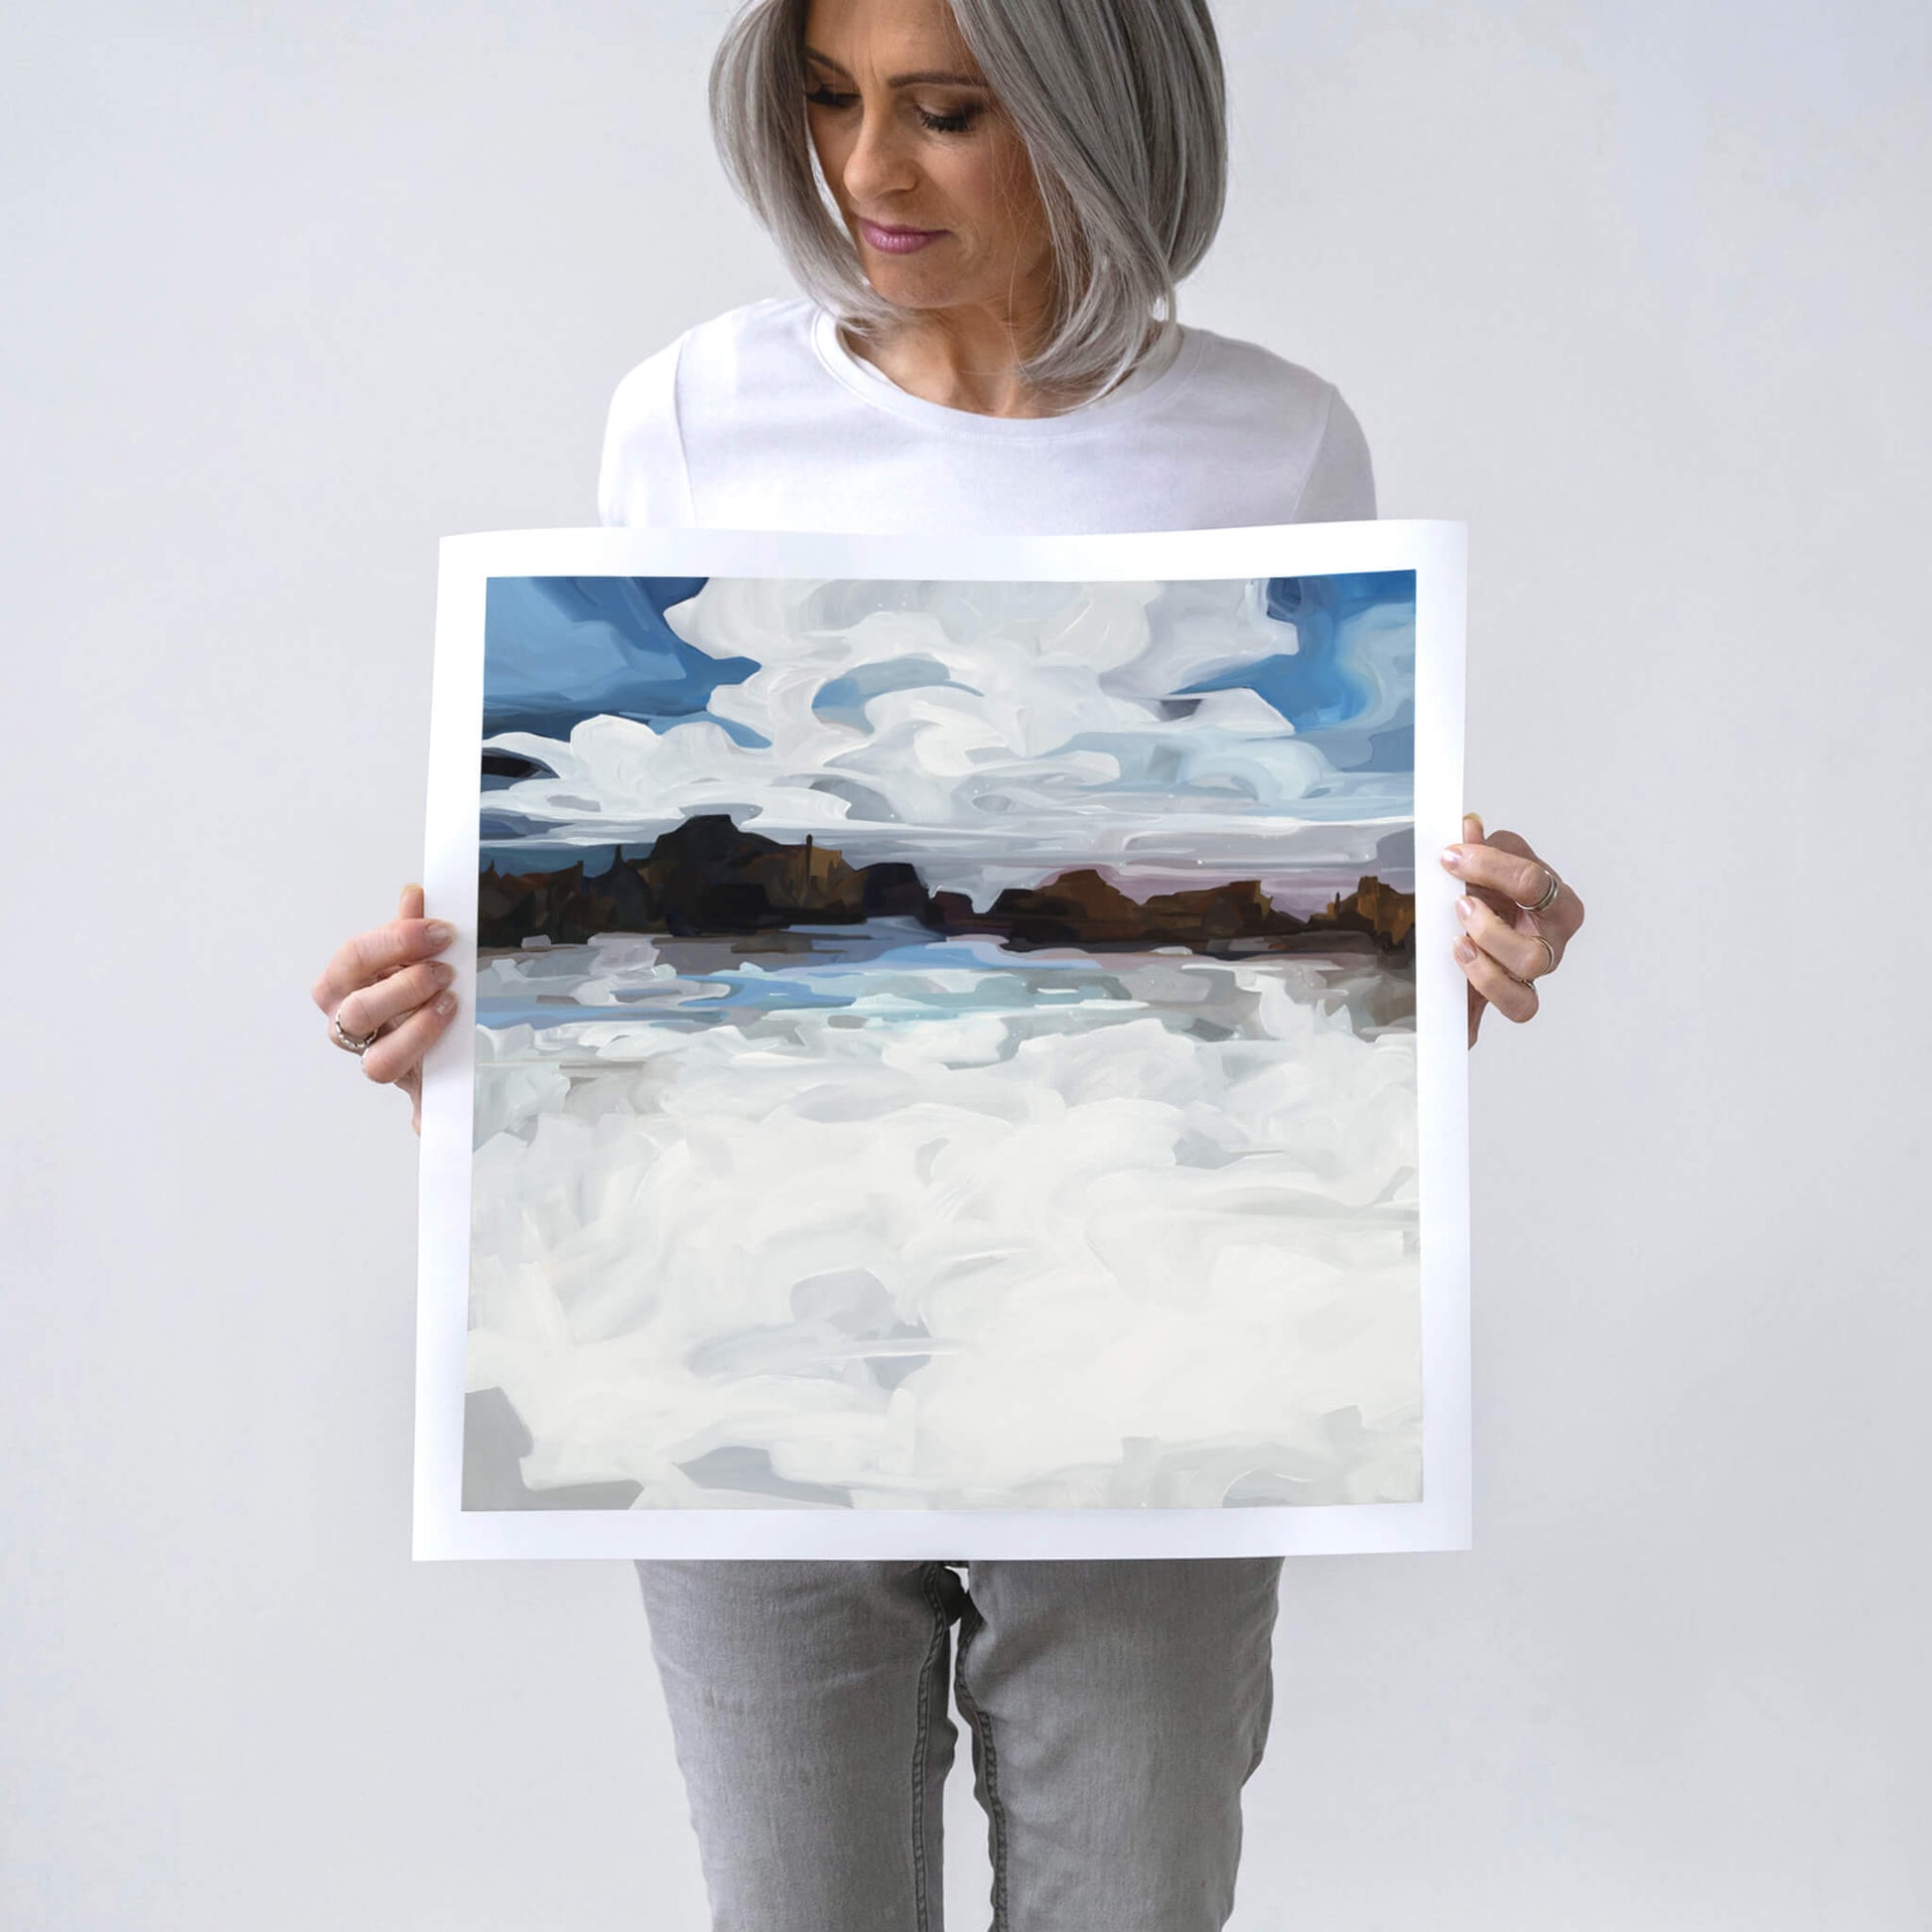 Canadian artist Susannah Bleasby holding a fine art print of Winterlake an abstract winter landscape painted in a winter palette